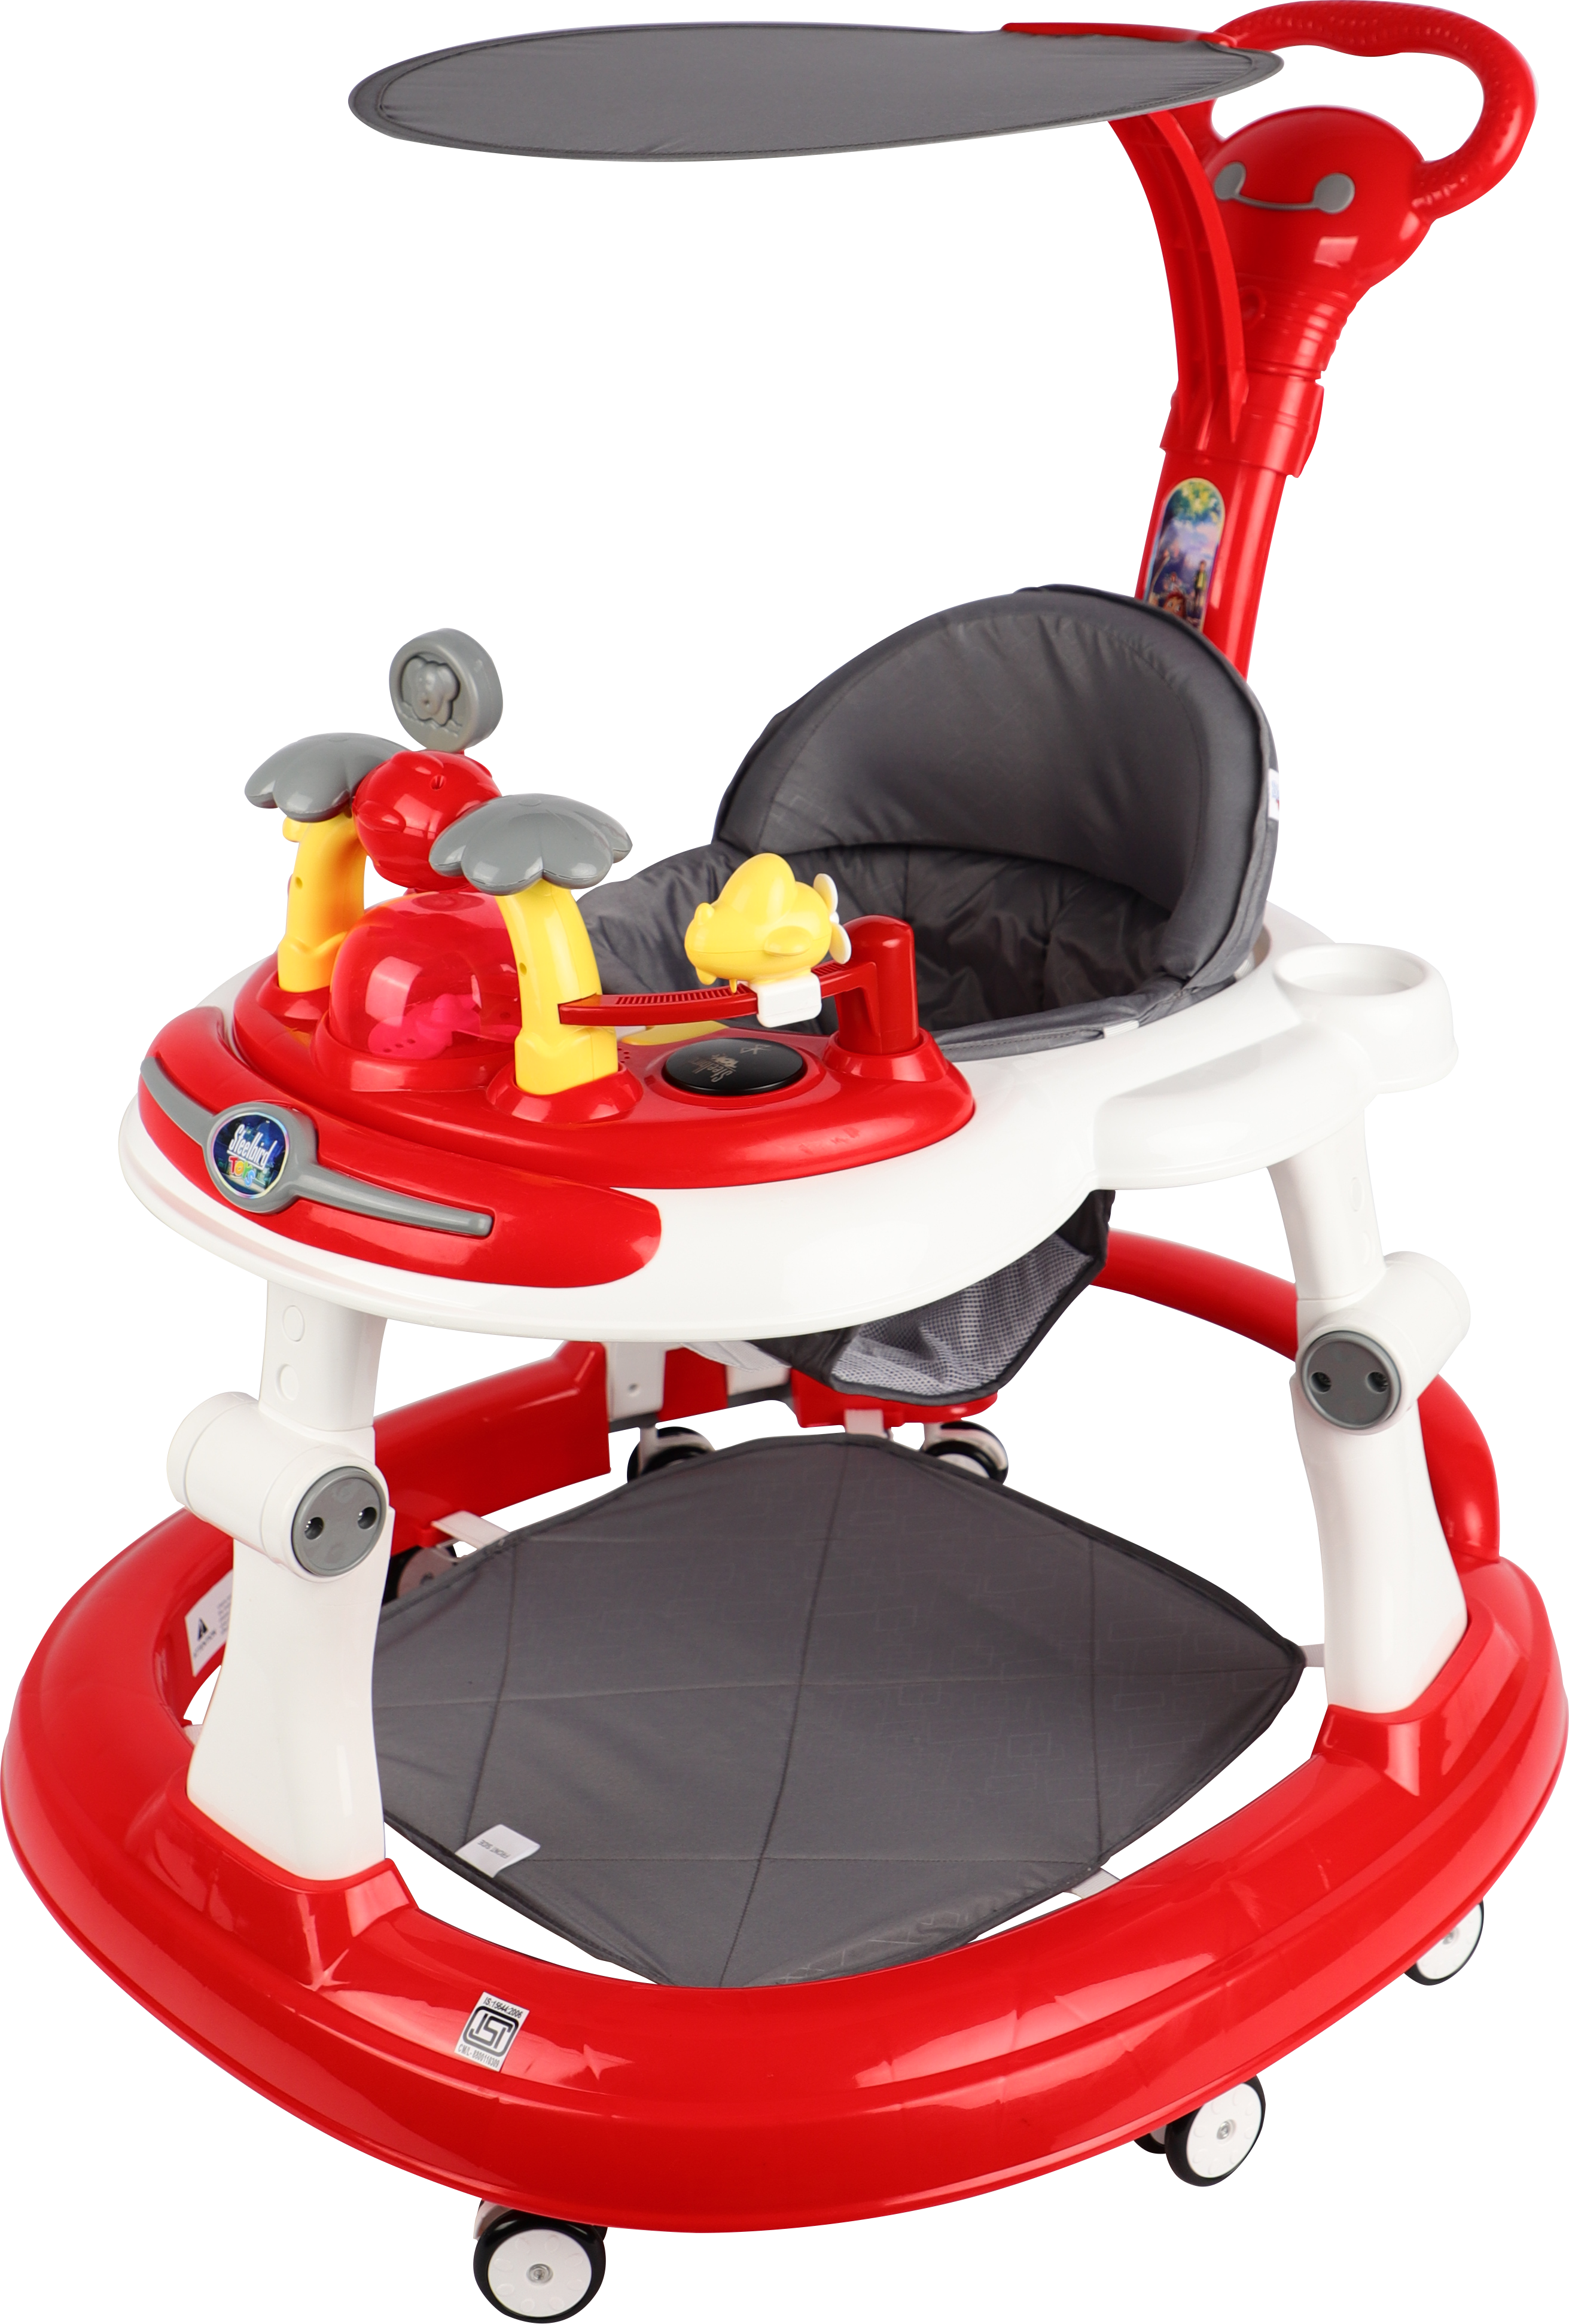 Bluetooth Baby Walker With Sunshield-Red